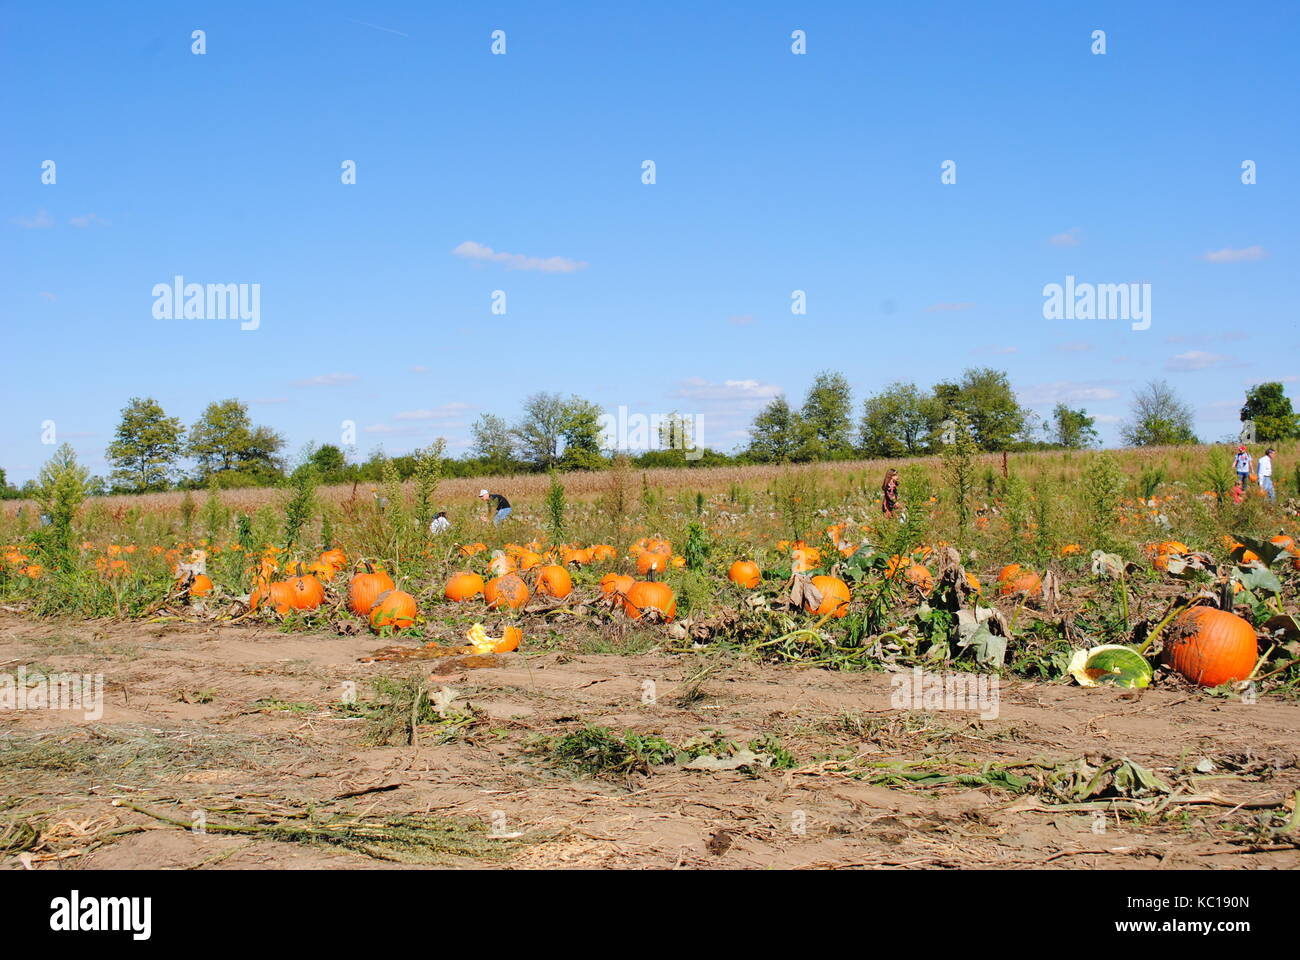 A pumpkin patch with people picking pumpkins Stock Photo